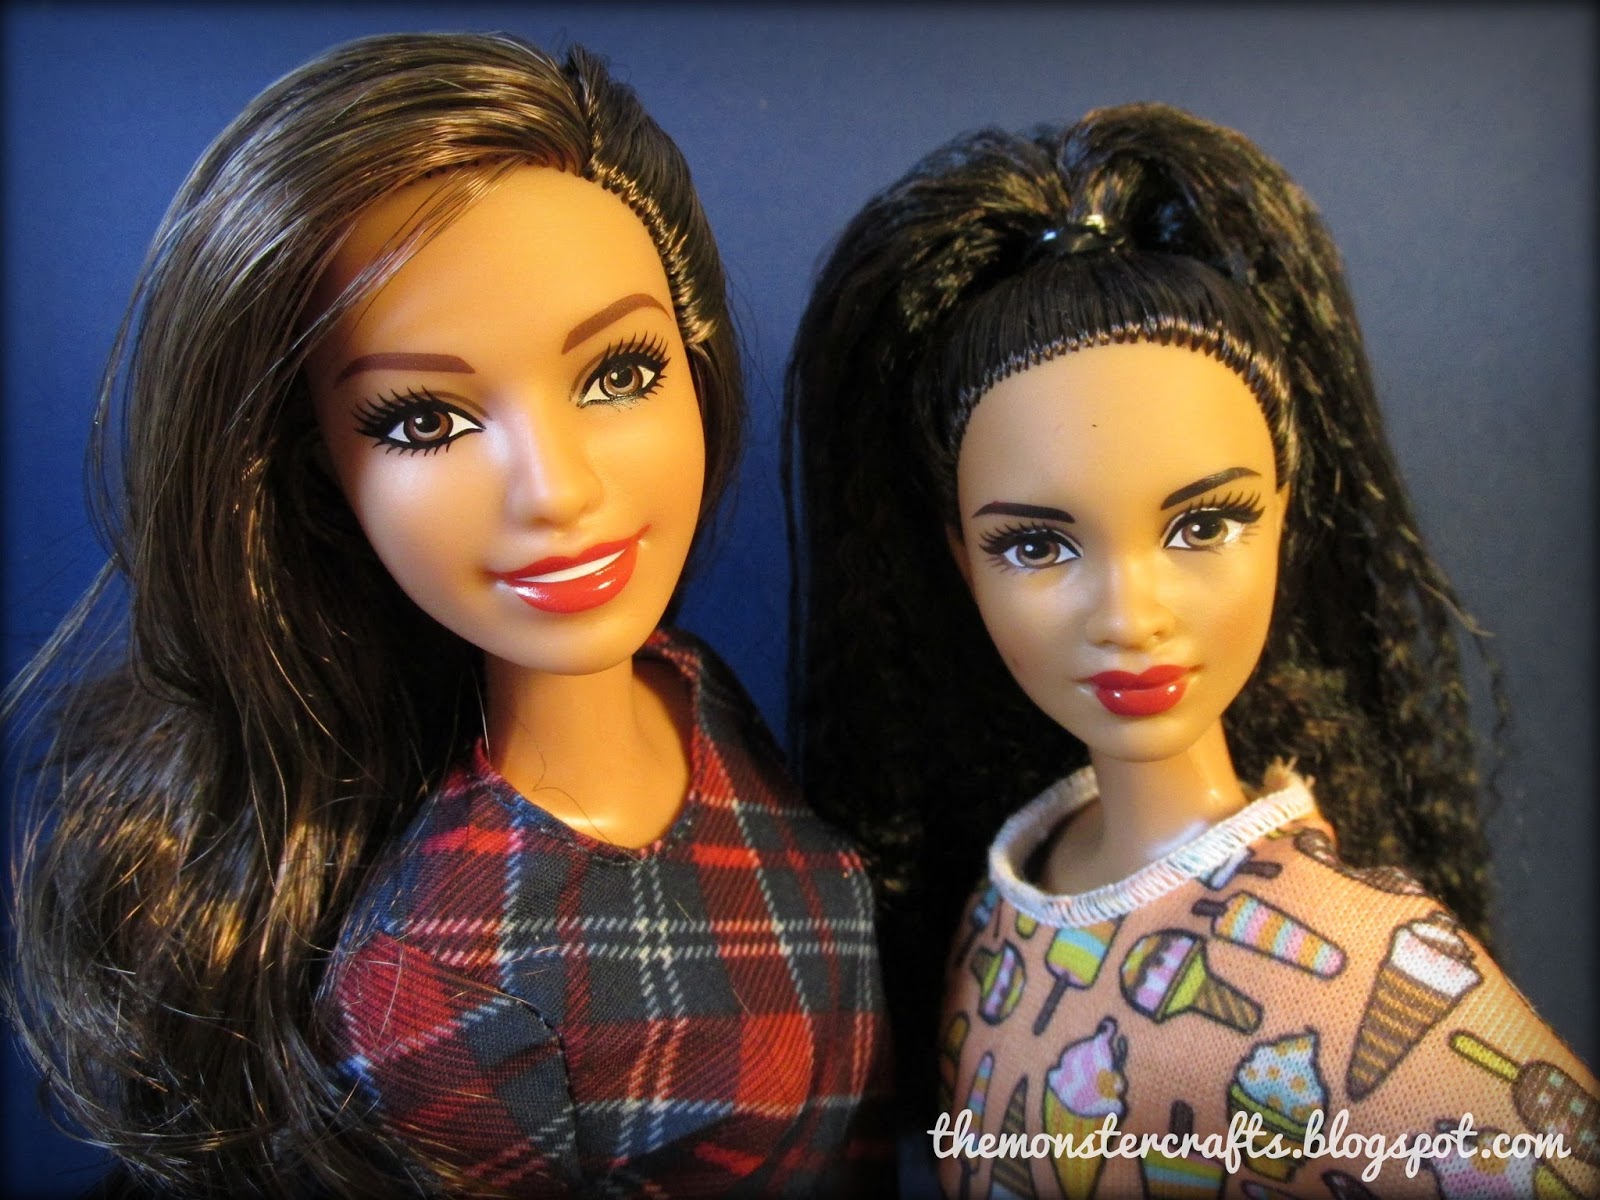 Monster Crafts: Doll Review: Barbie Fashionistas Tall 